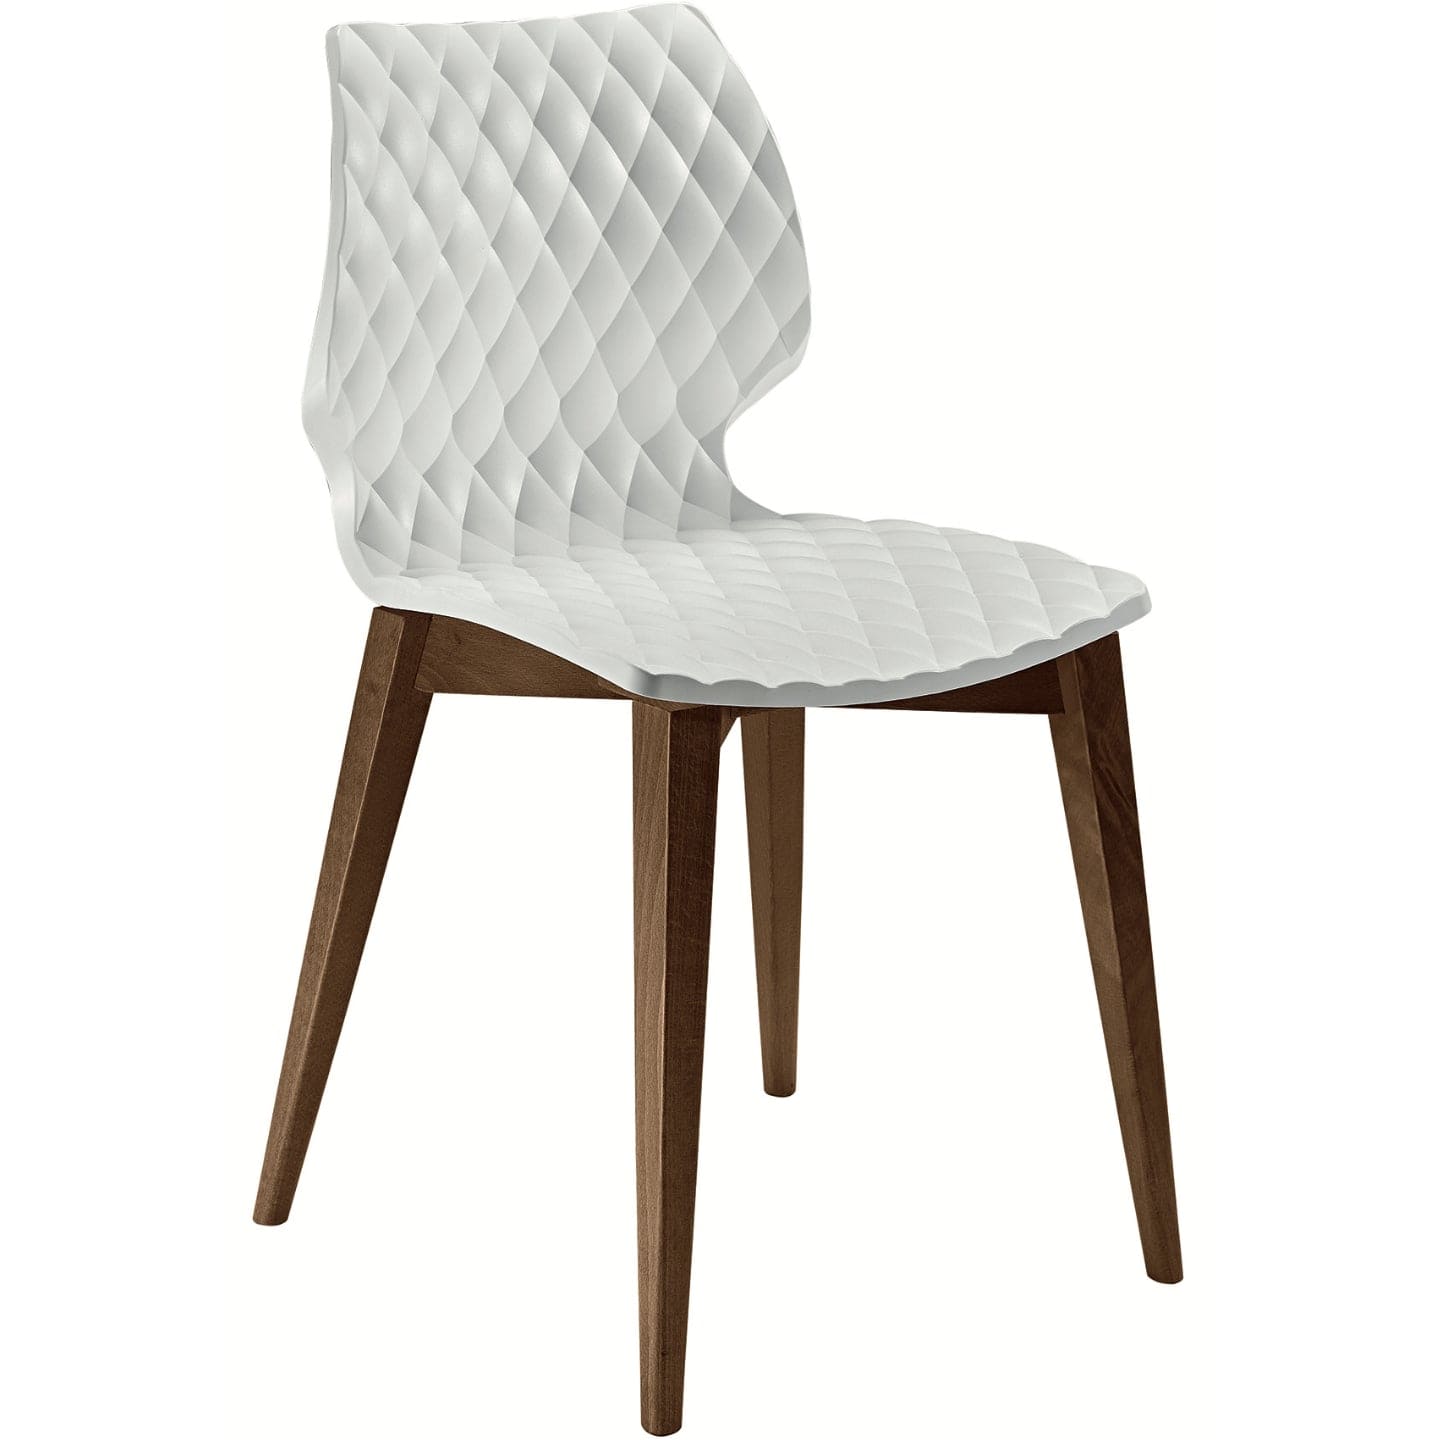 Solid Wood Dining Chairs Canada Uni White - Your Bar Stools Canada